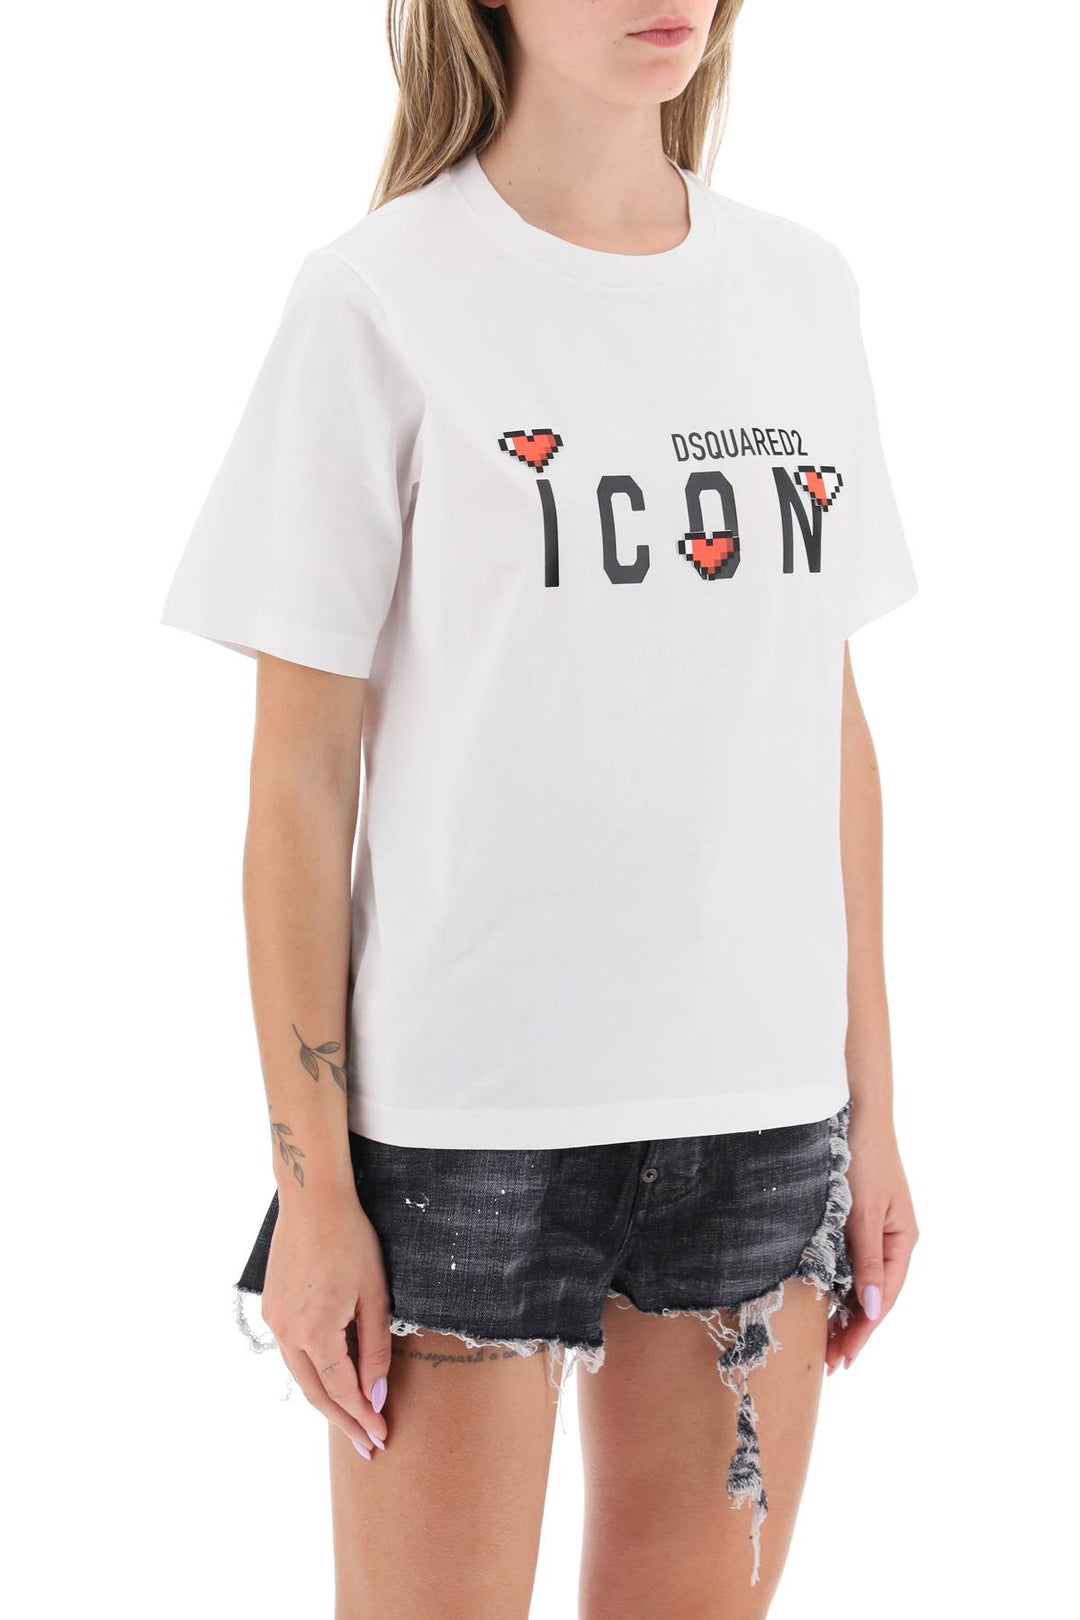 T Shirt 'Icon Game Lover' - Dsquared2 - Donna